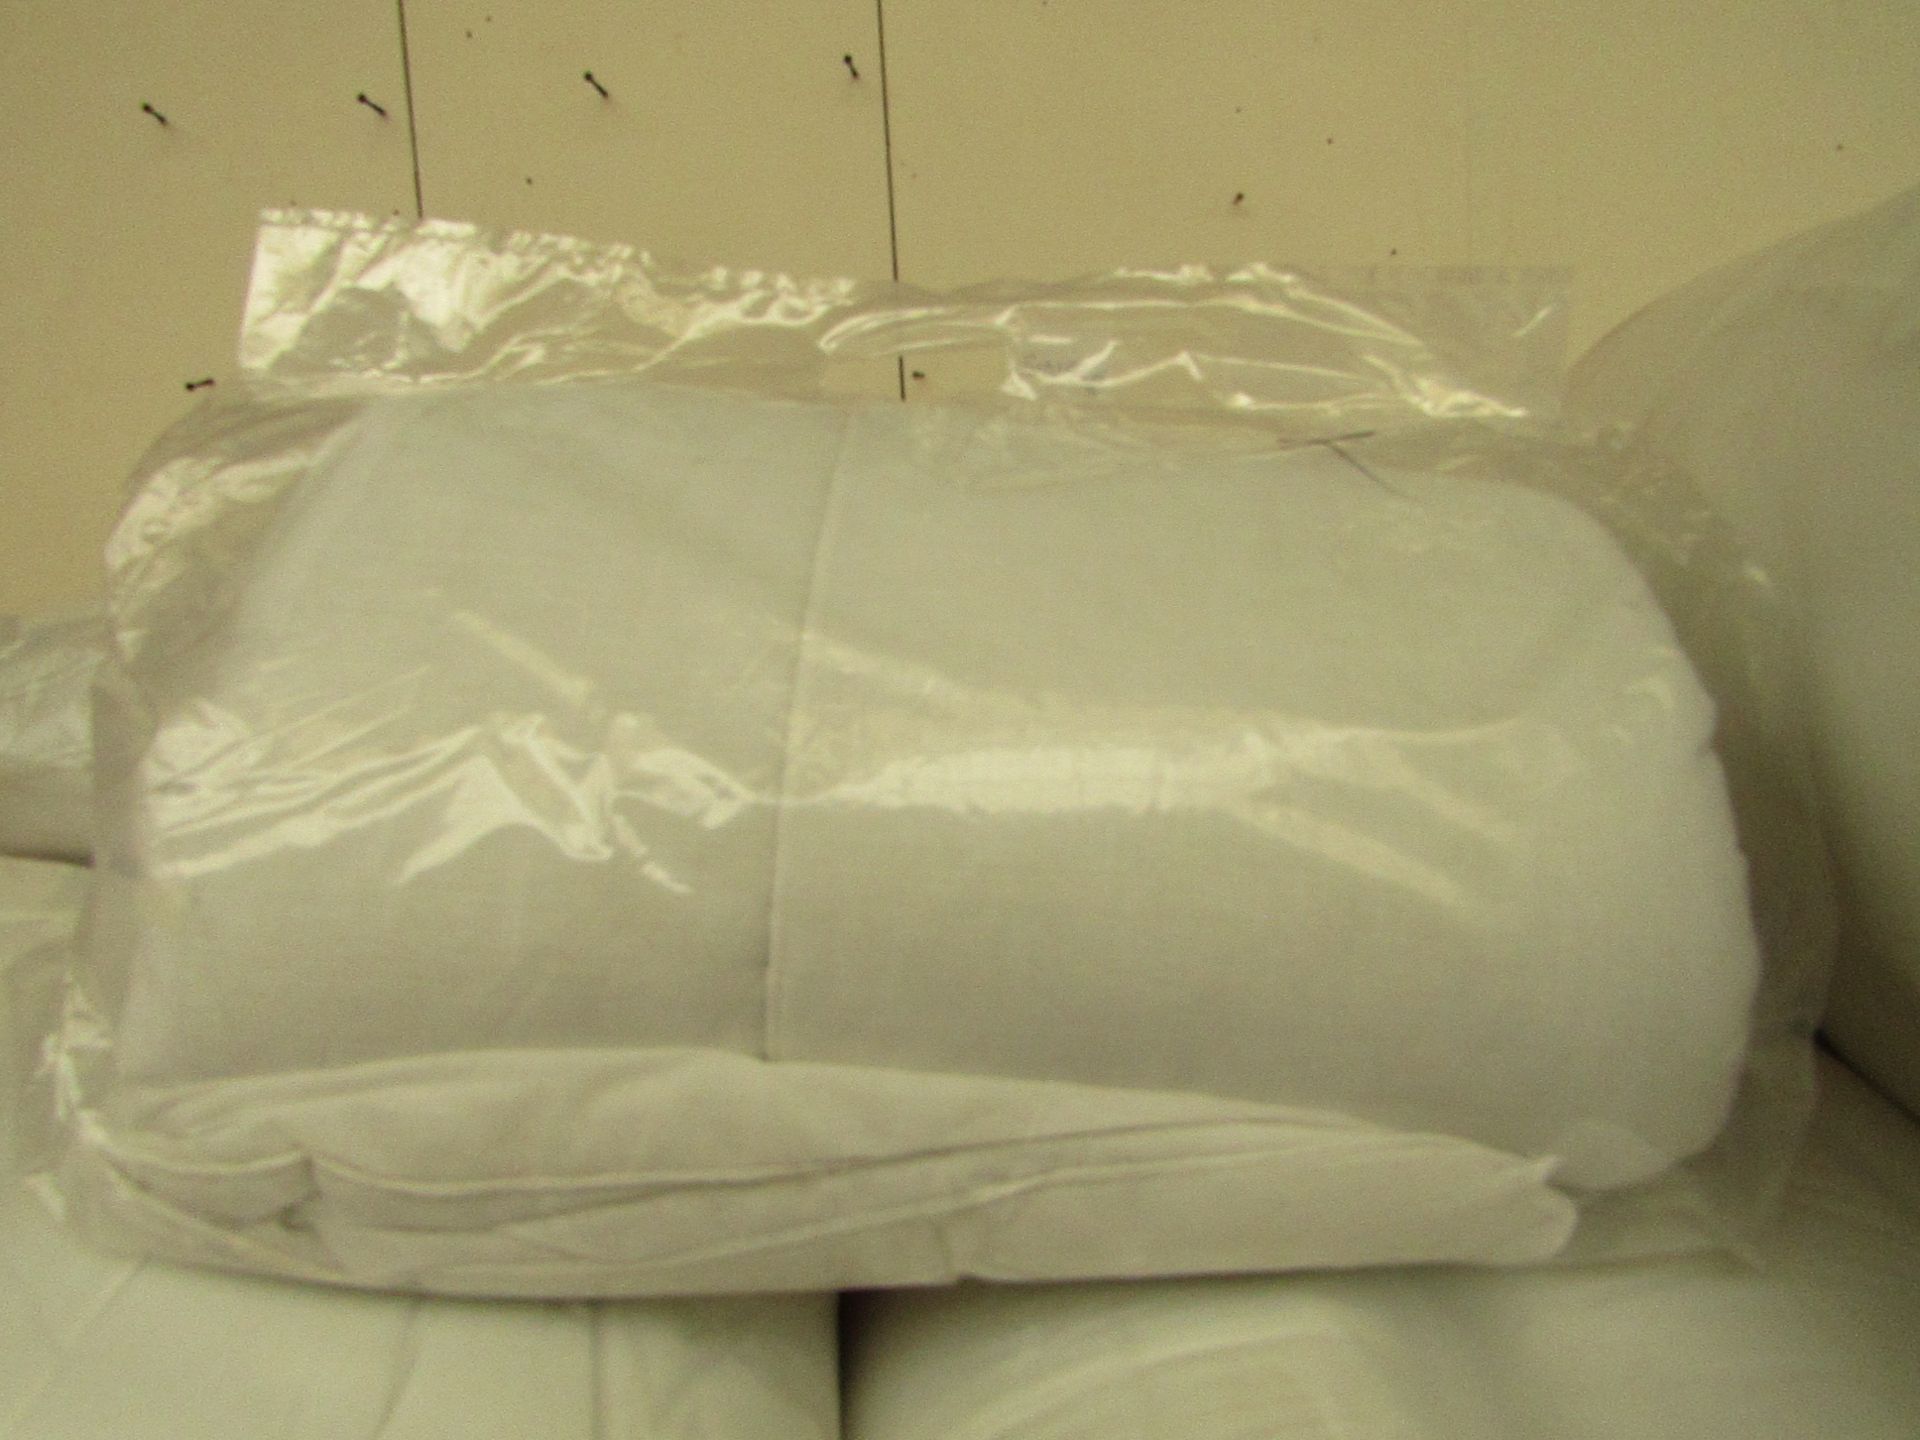 Unbranded Single Duvet, new and packaged slight seconds